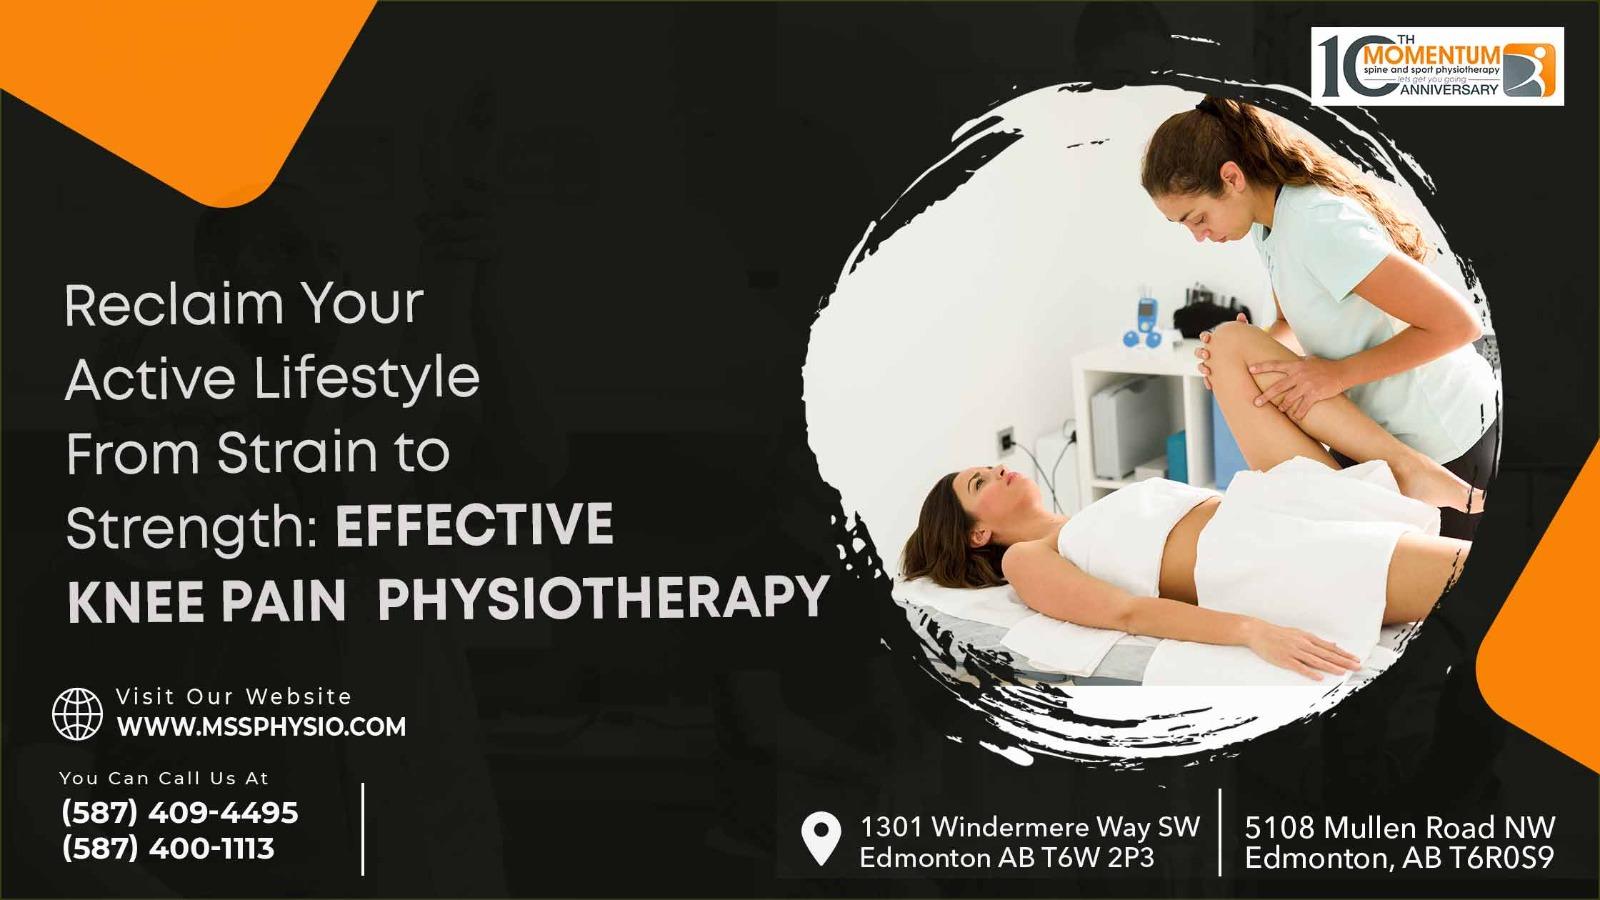 Reclaim Your Active Lifestyle From Strain to Strength Effective Knee Pain Physiotherapy